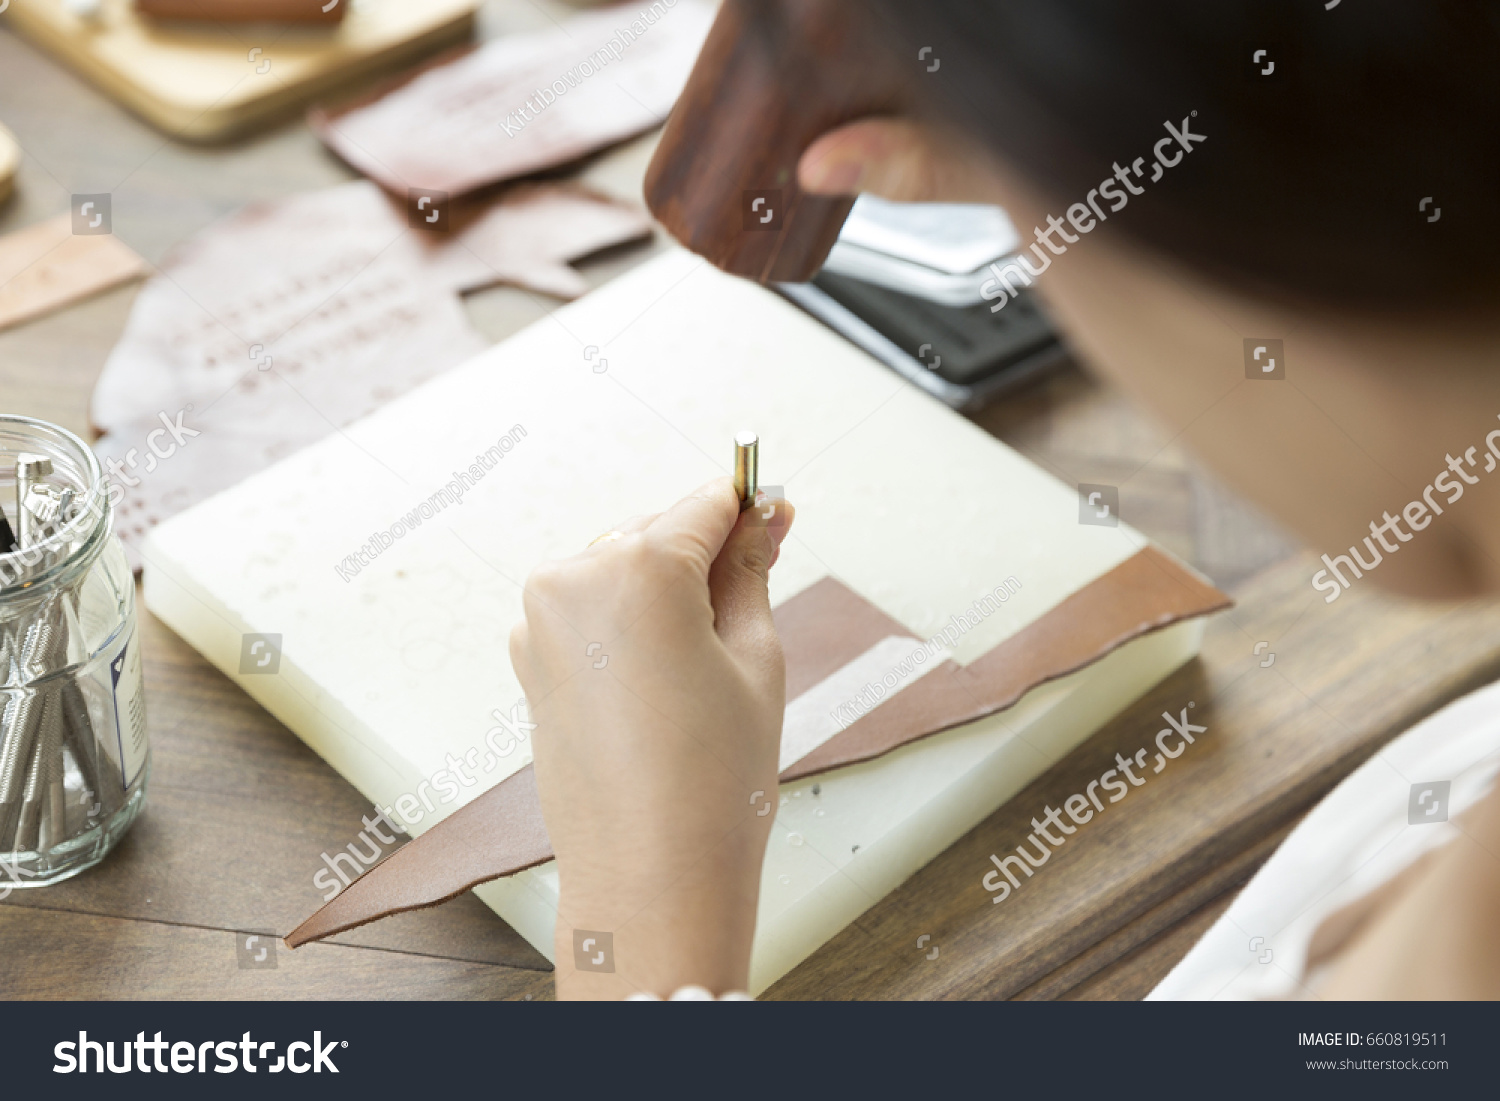 Hands Doing Leather Craft Work Stock Photo 660819511 | Shutterstock